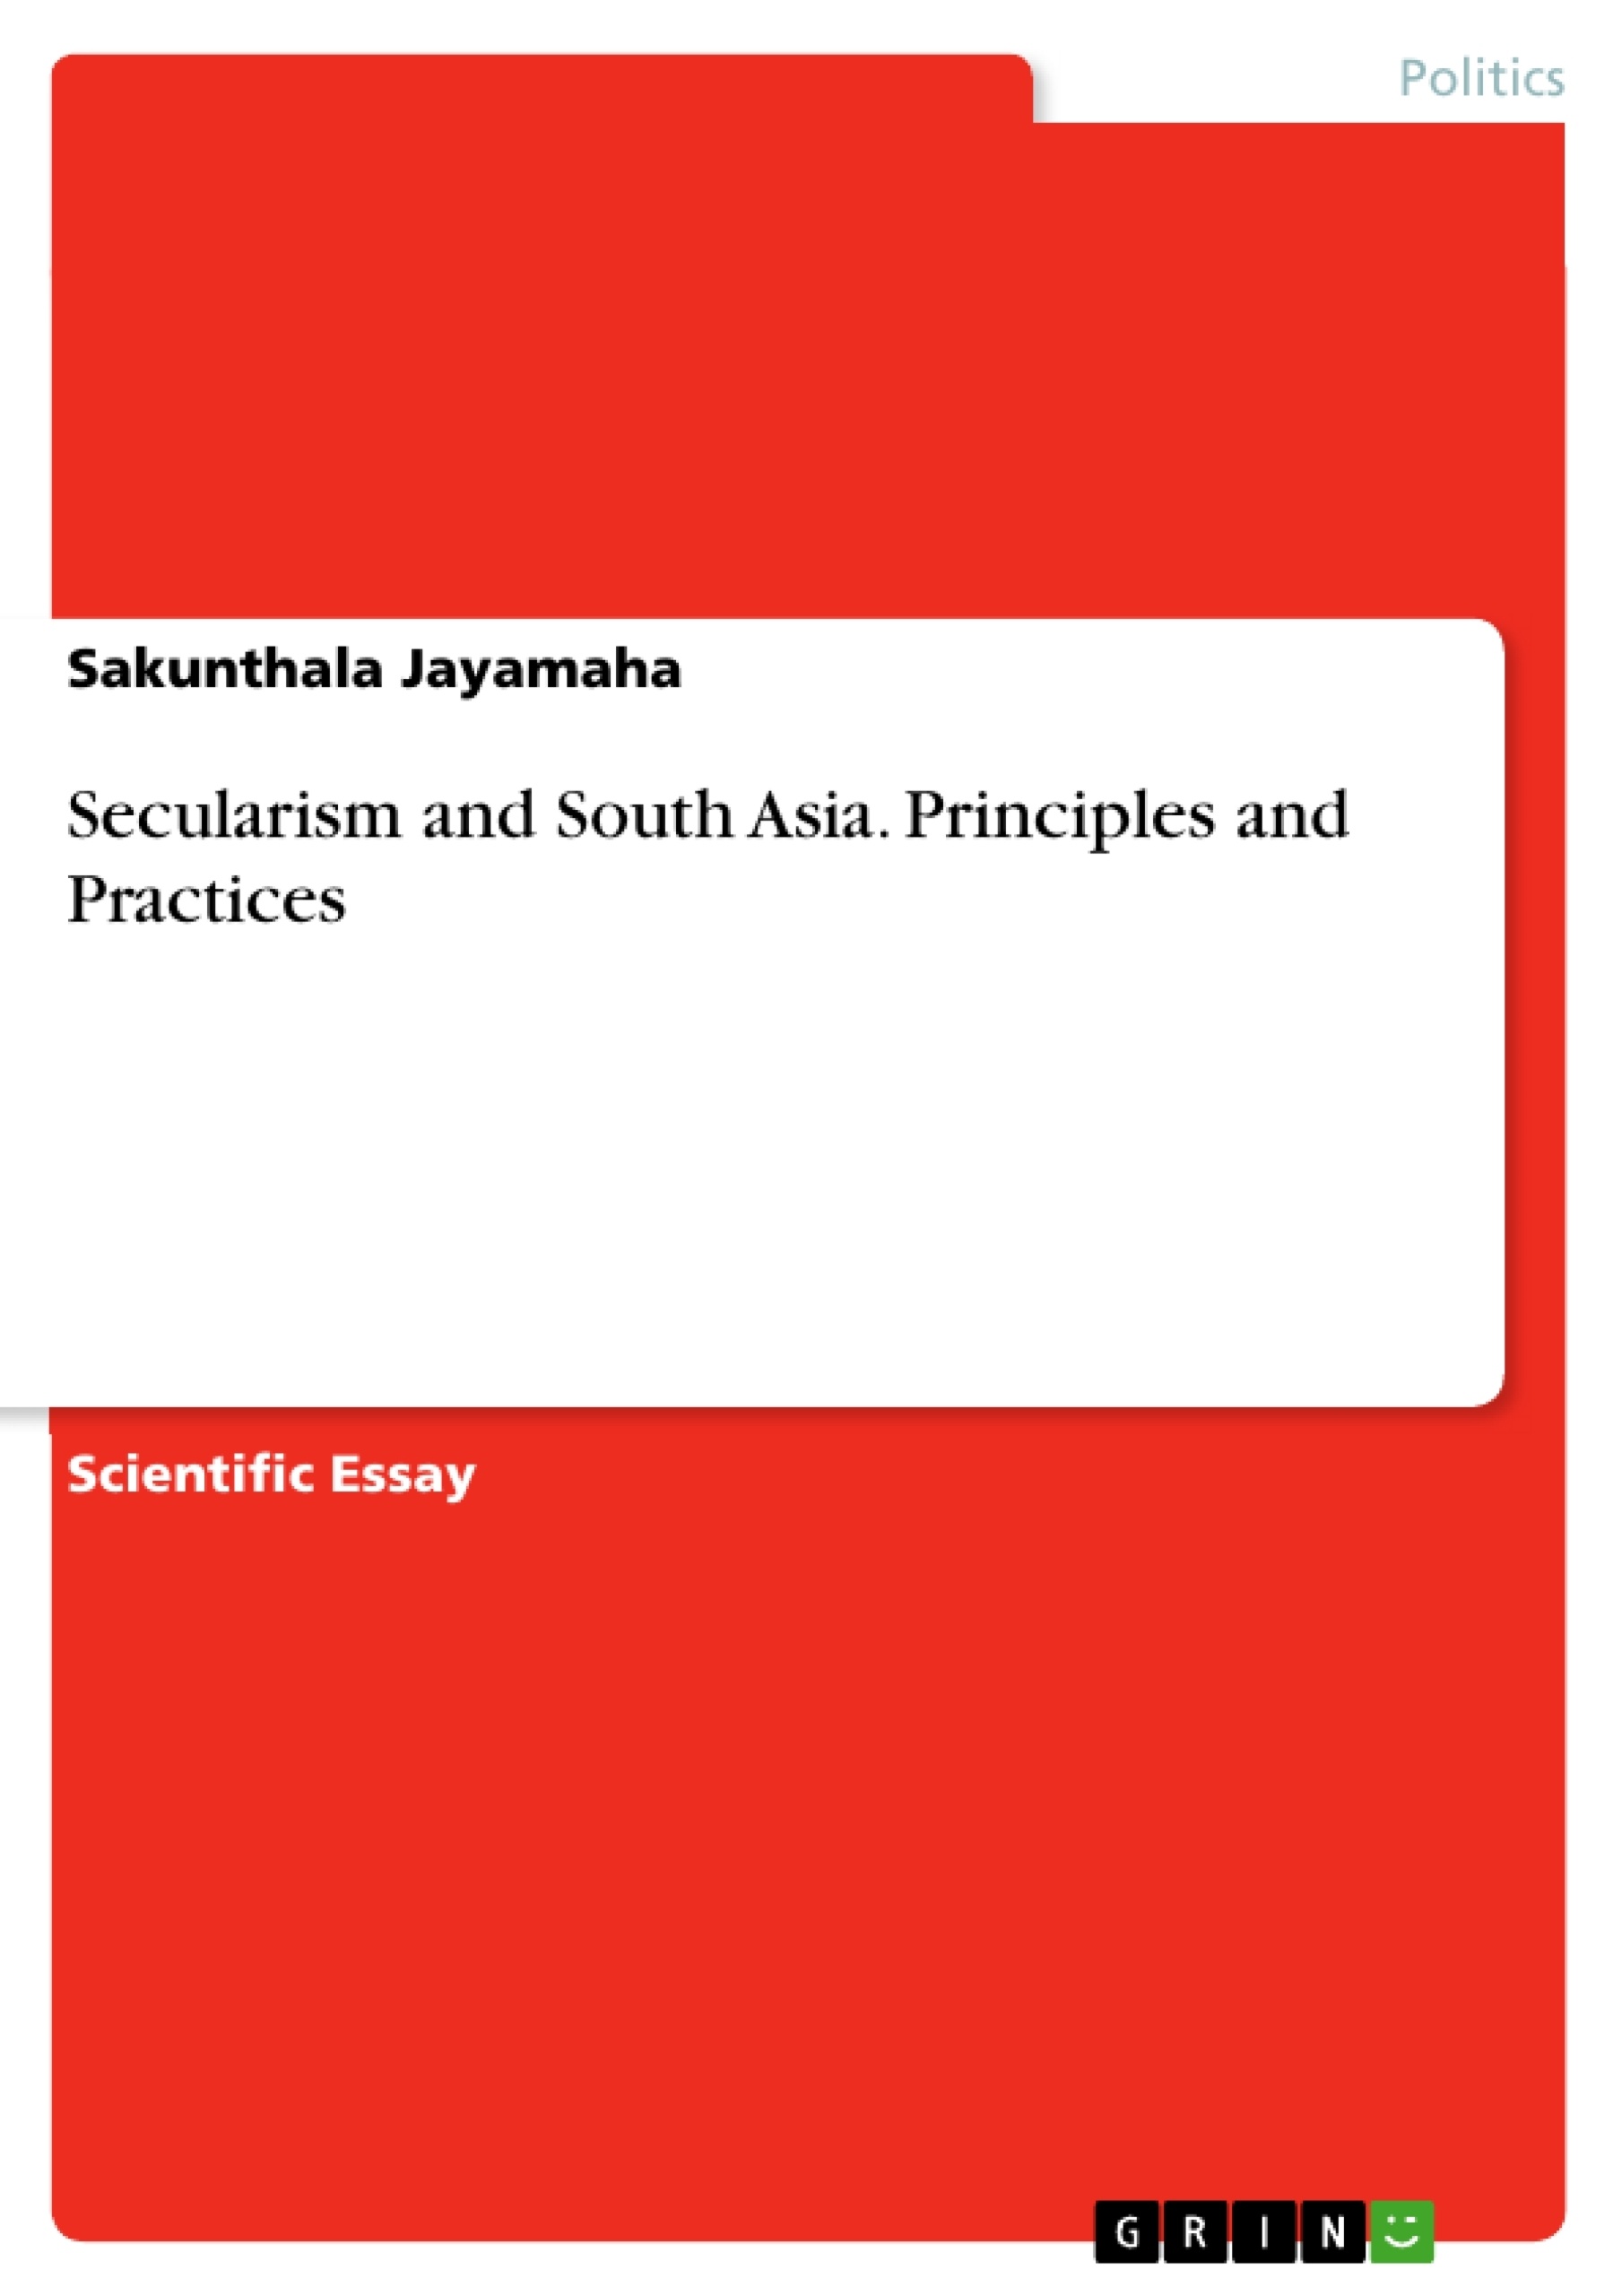 Title: Secularism and South Asia. Principles and Practices